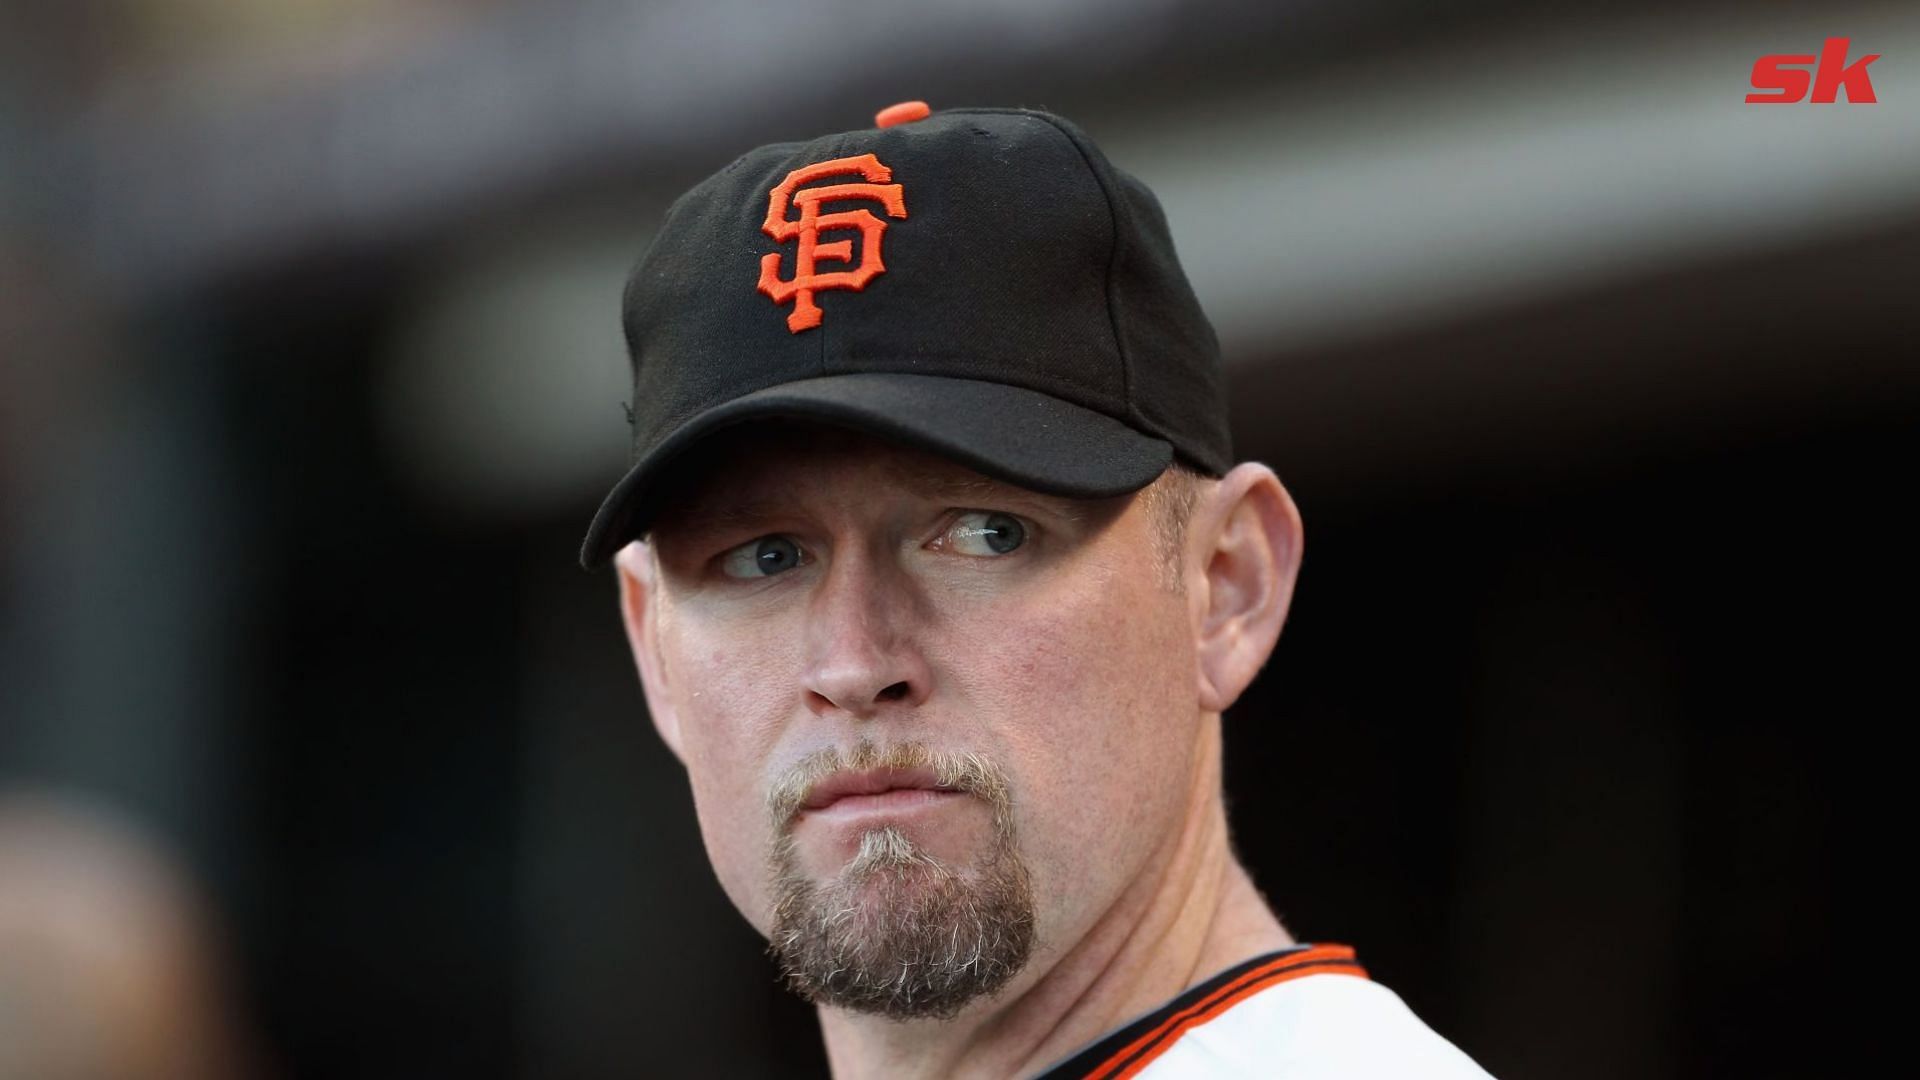 When Aubrey Huff equipped his sons to use firearms in the wake of Bernie Sanders' 2019 presidential campaign